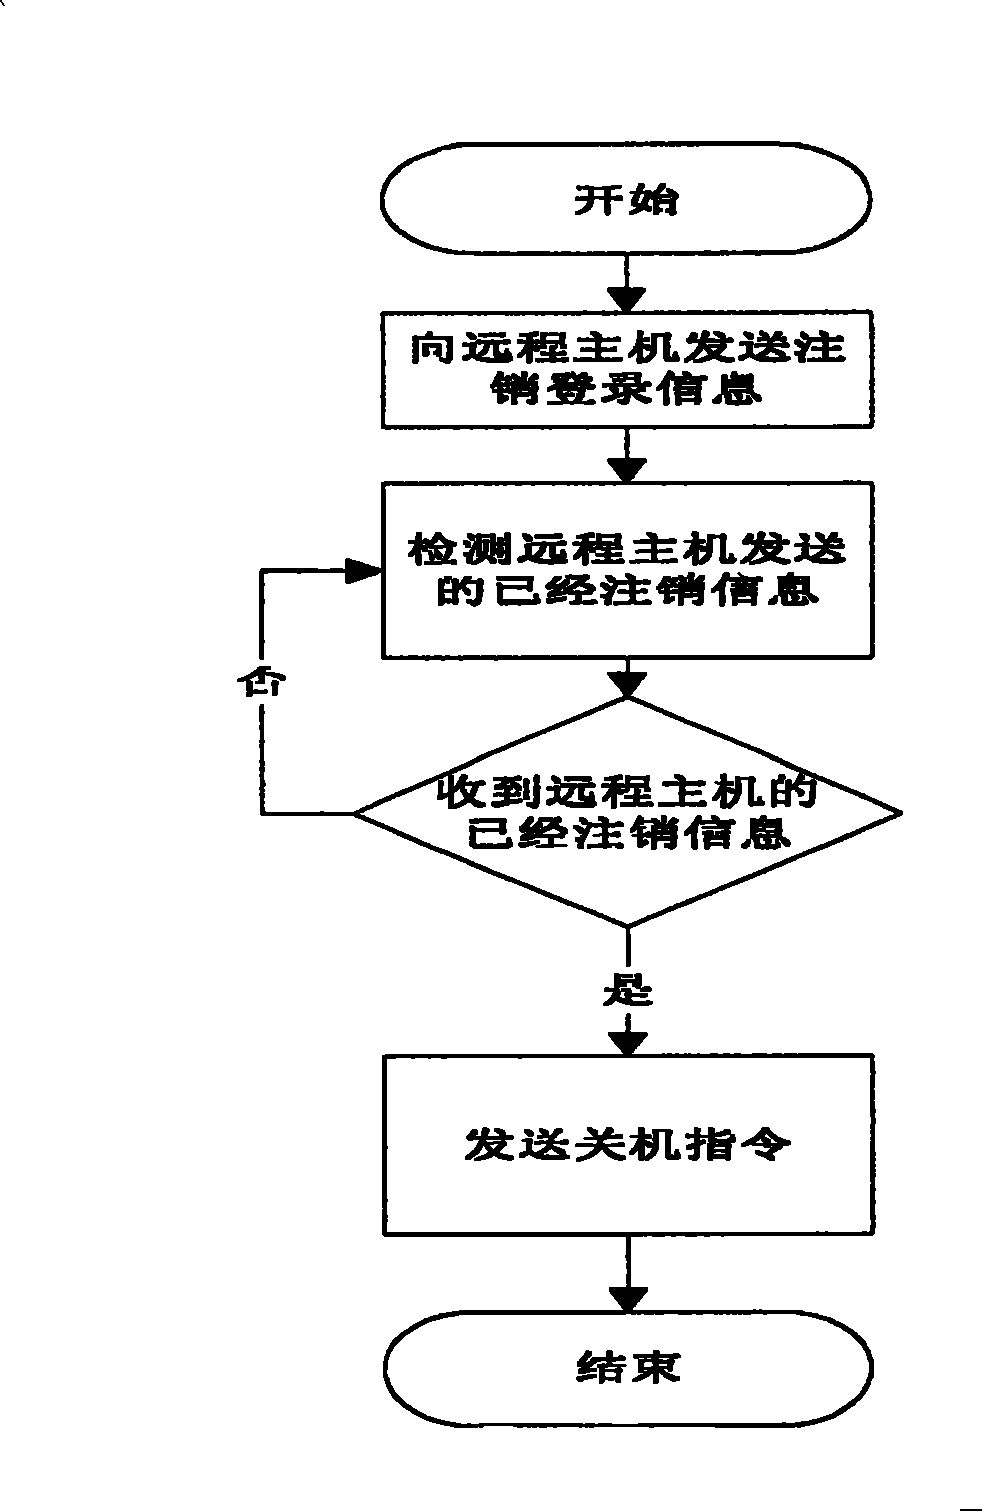 Method of remote controlling computer in different area via computer network